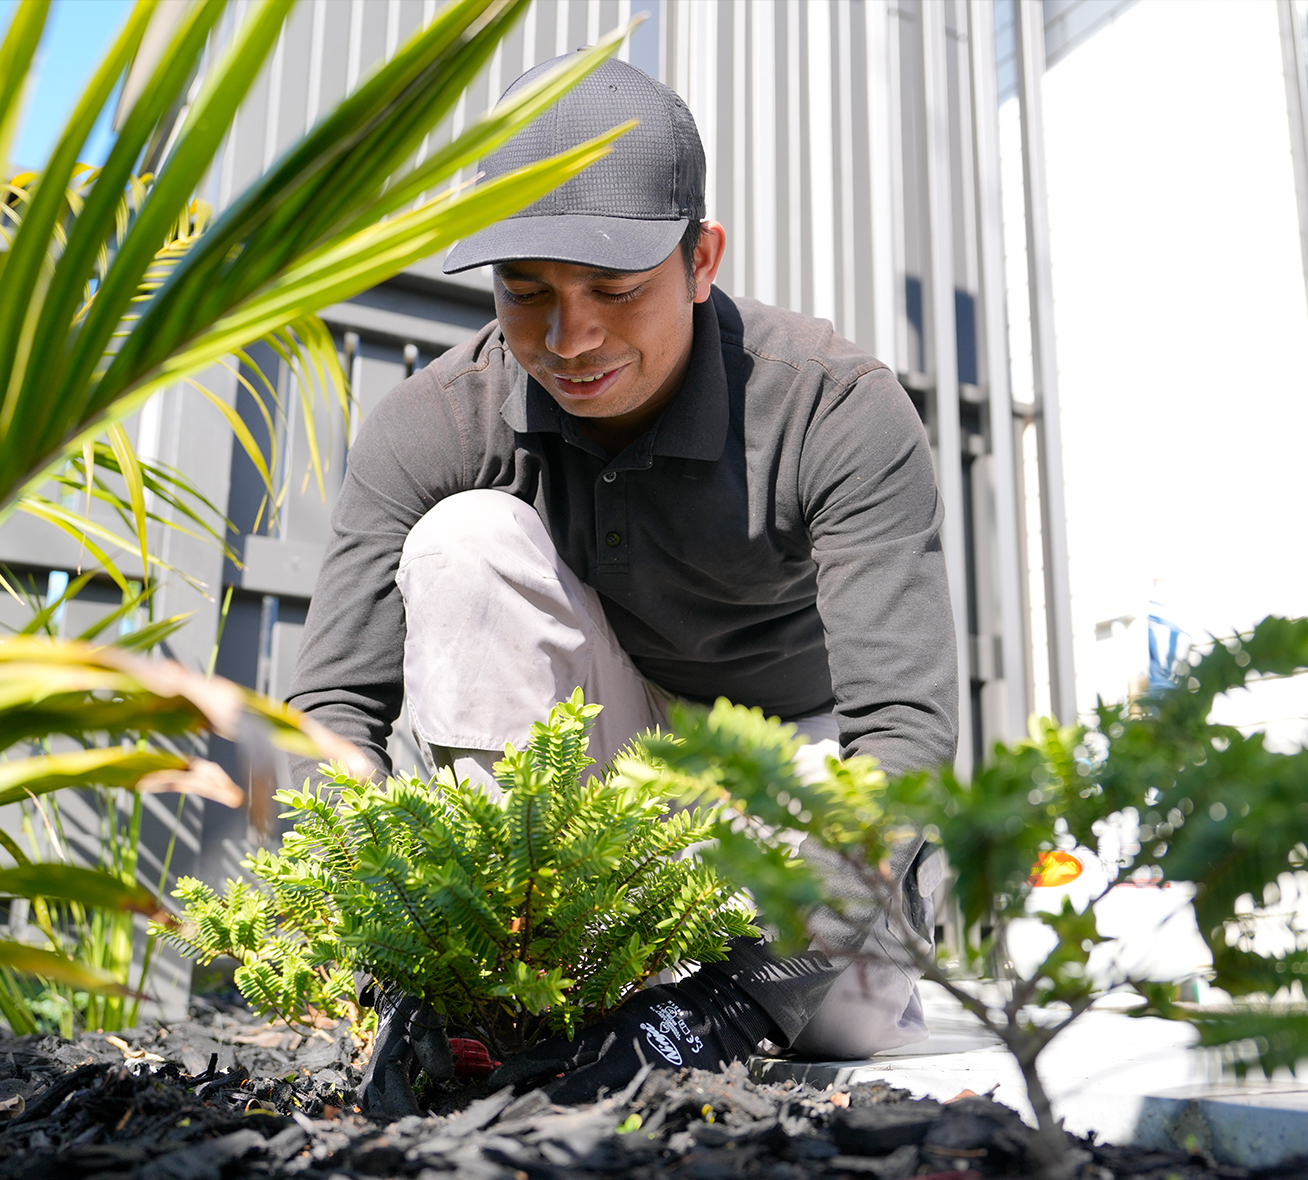 A man in a gray cap and shirt is kneeling and tending to a small fern in a home garden bed, with a focused expression, surrounded by lush greenery in a sunny setting.